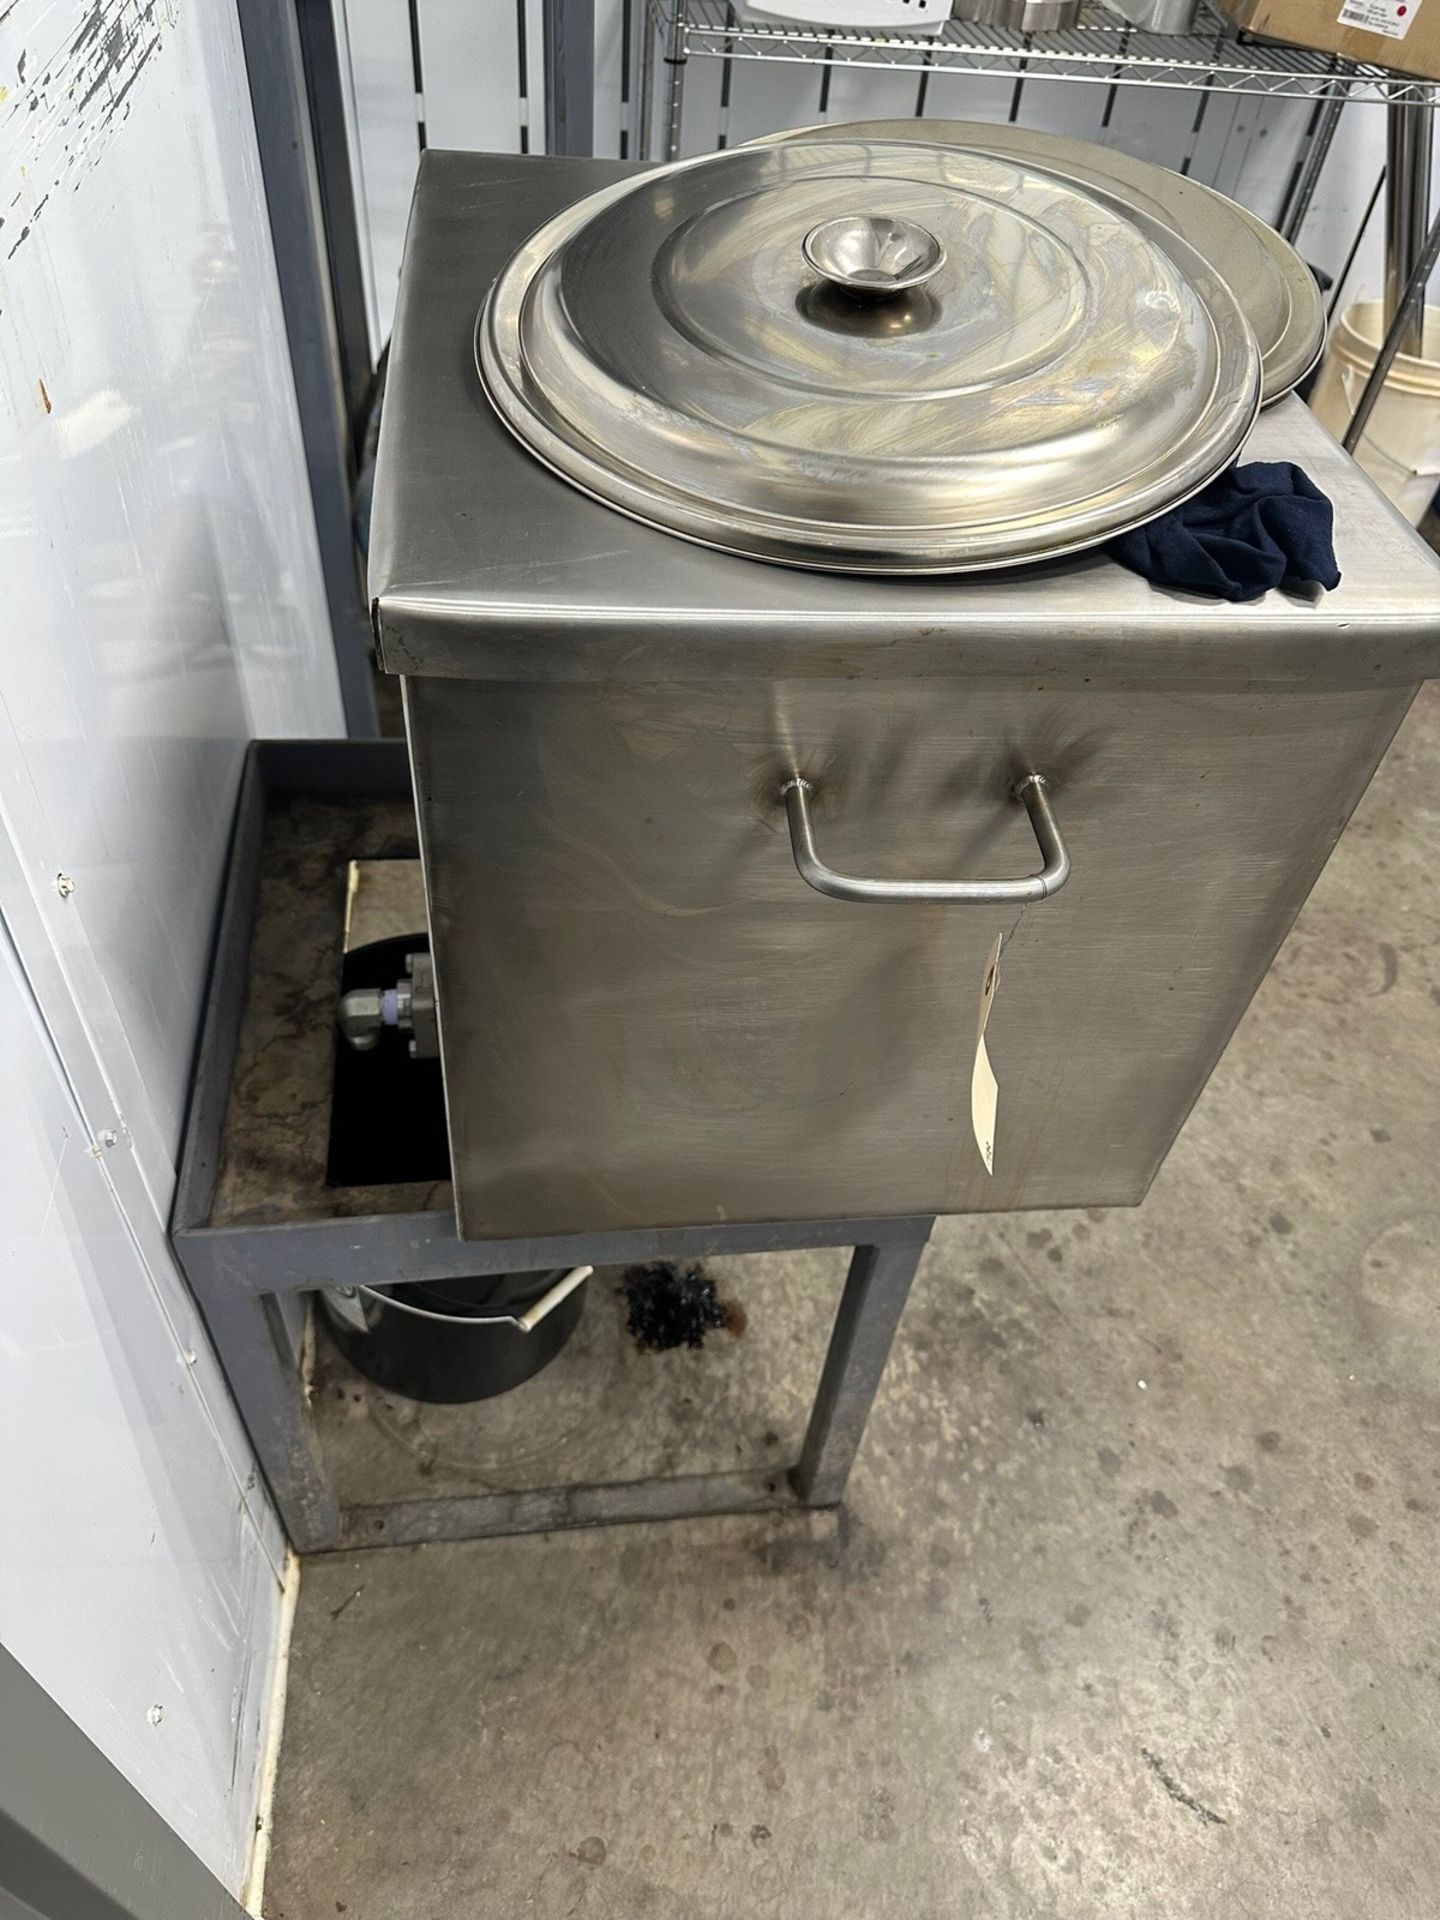 Stainless Steel Holding Tank | Rig Fee $100 - Image 3 of 3